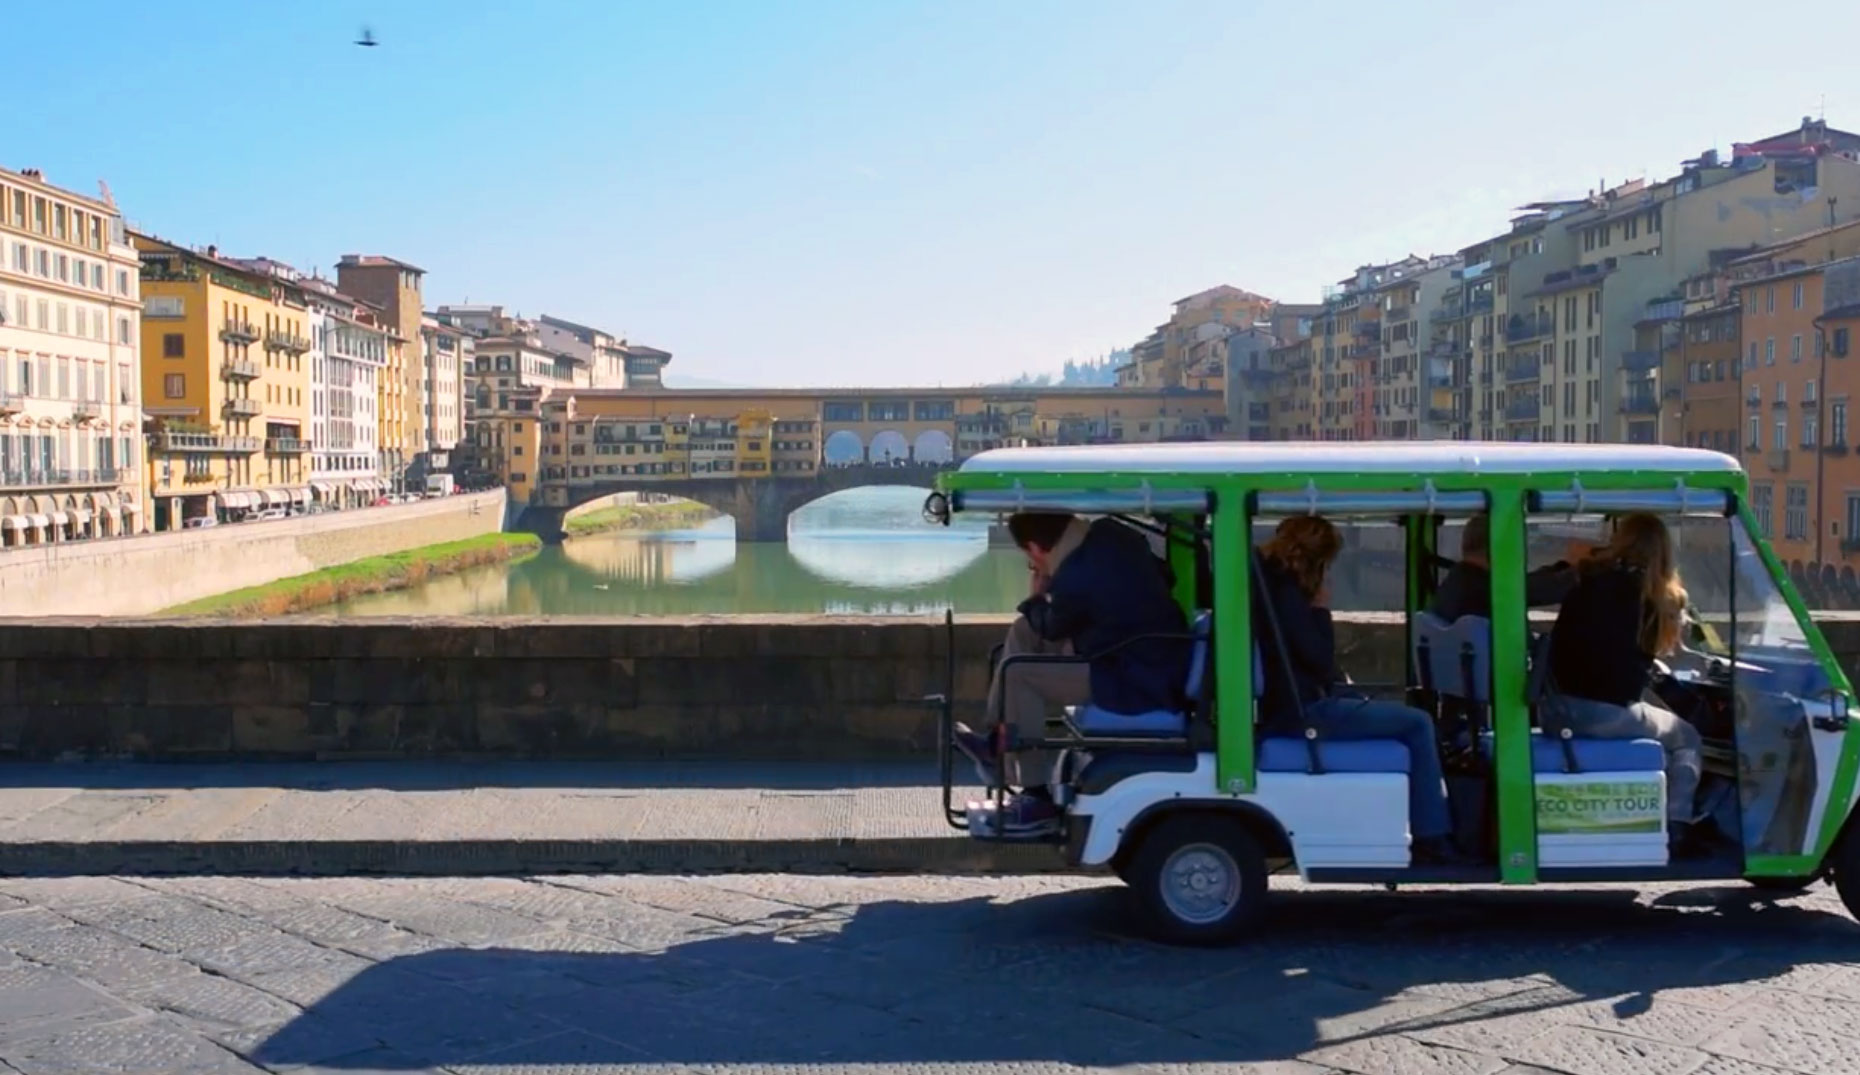 my green tours florence